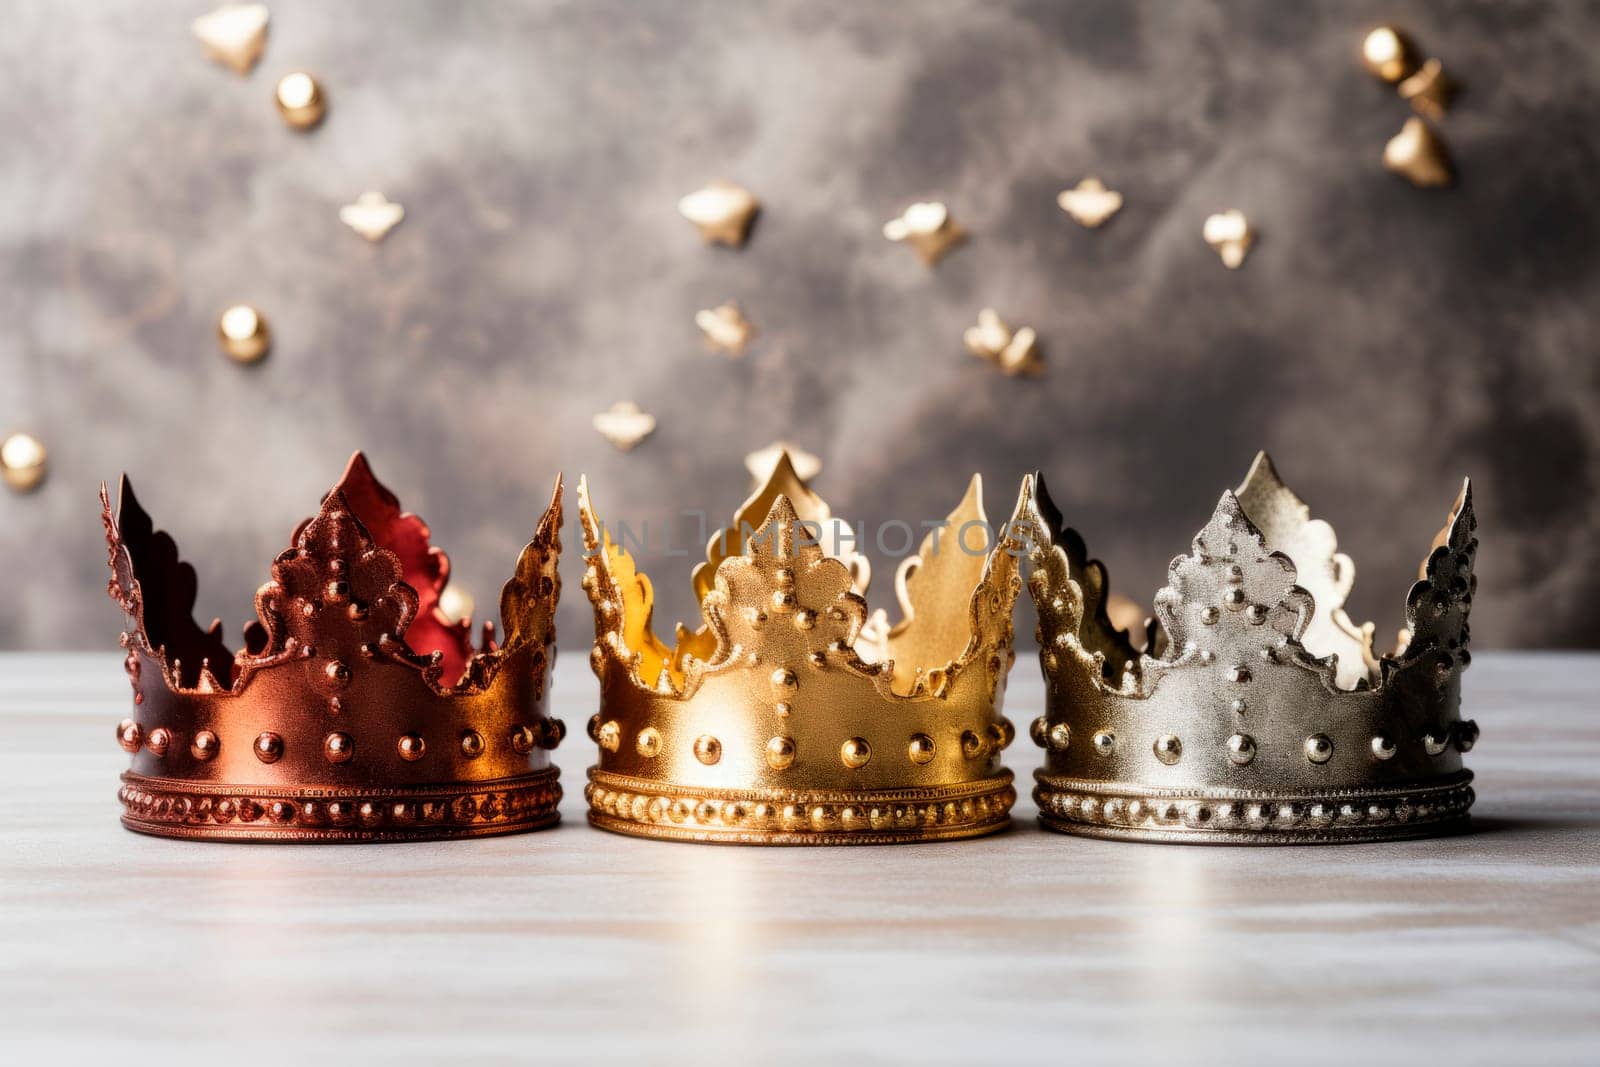 Three crowns as a symbol of the celebration of the Day of the Three Kings.